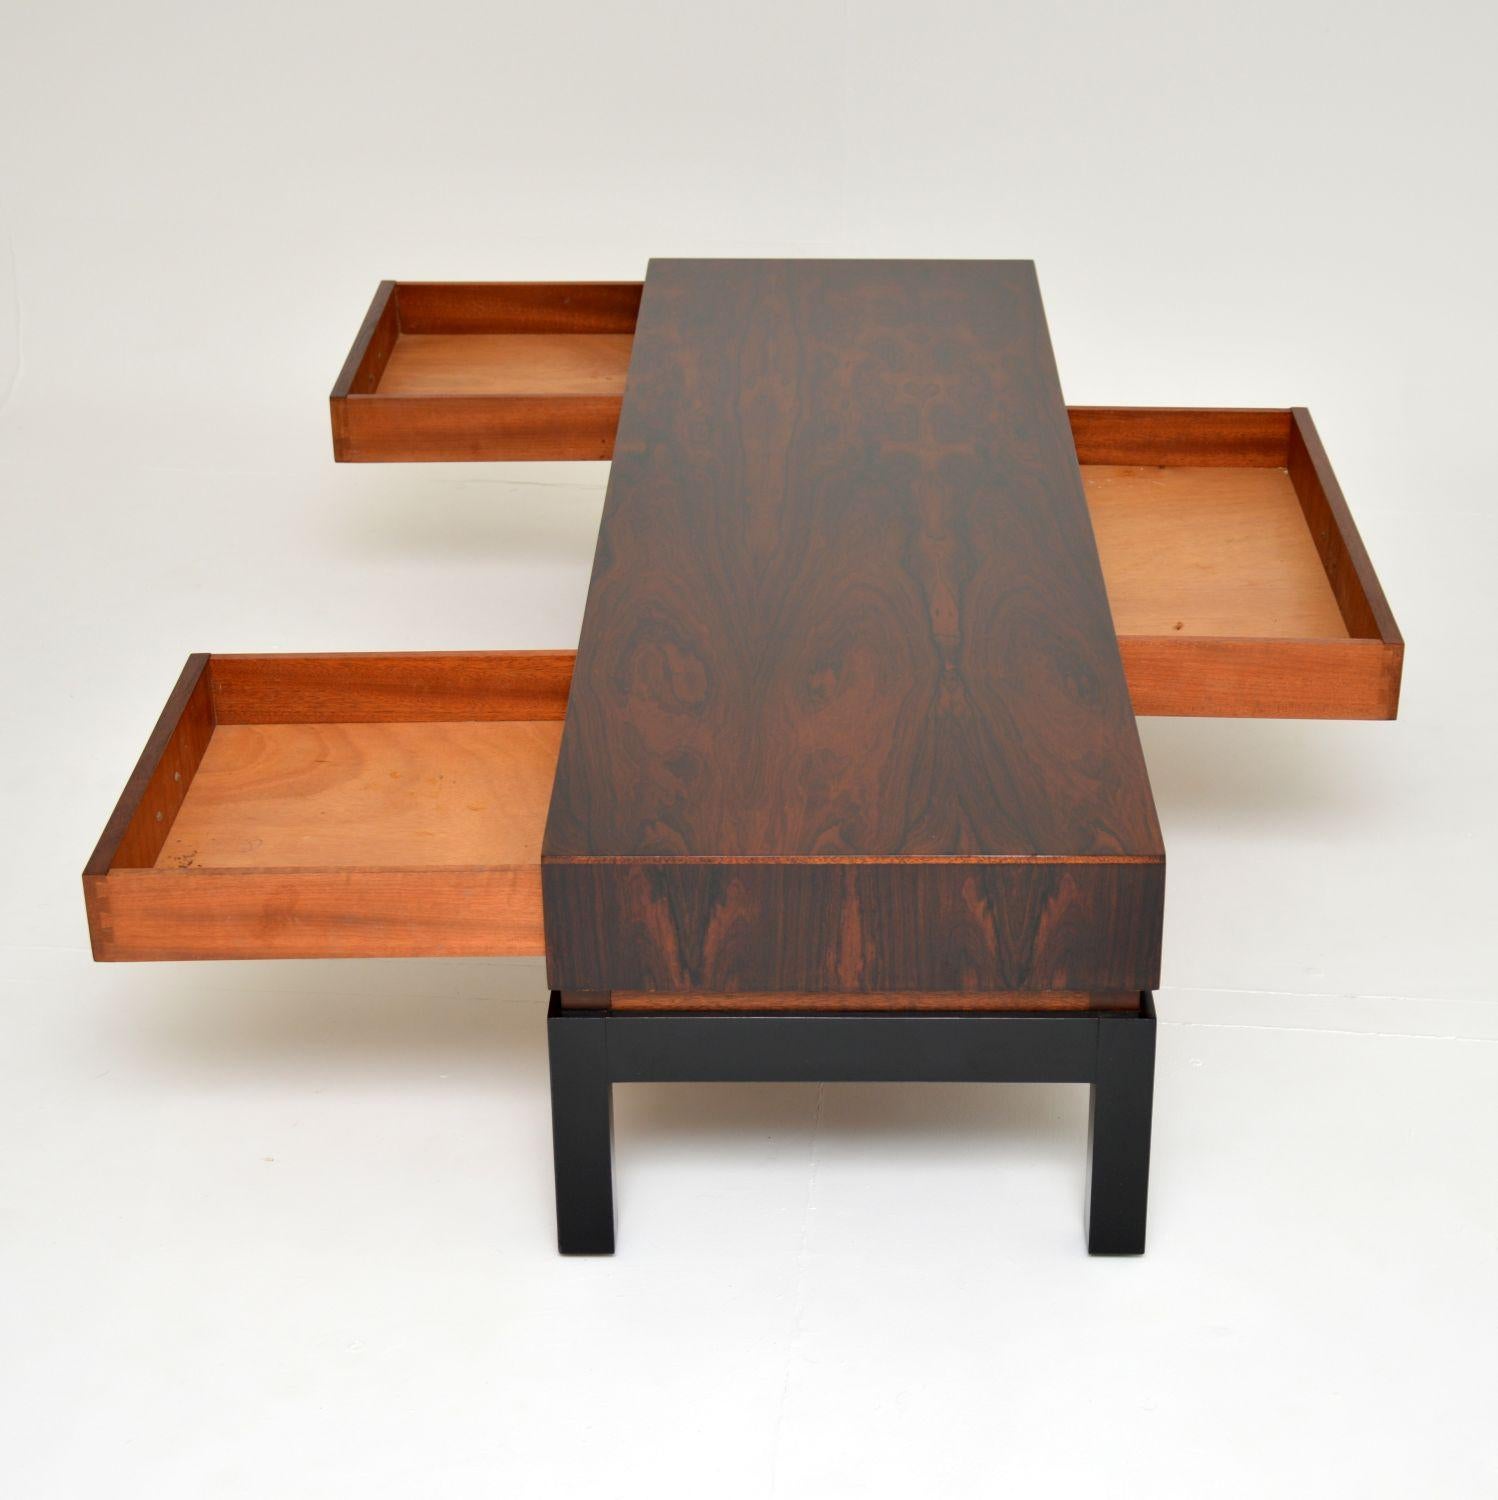 Wood 1960's Coffee Table by Greaves & Thomas